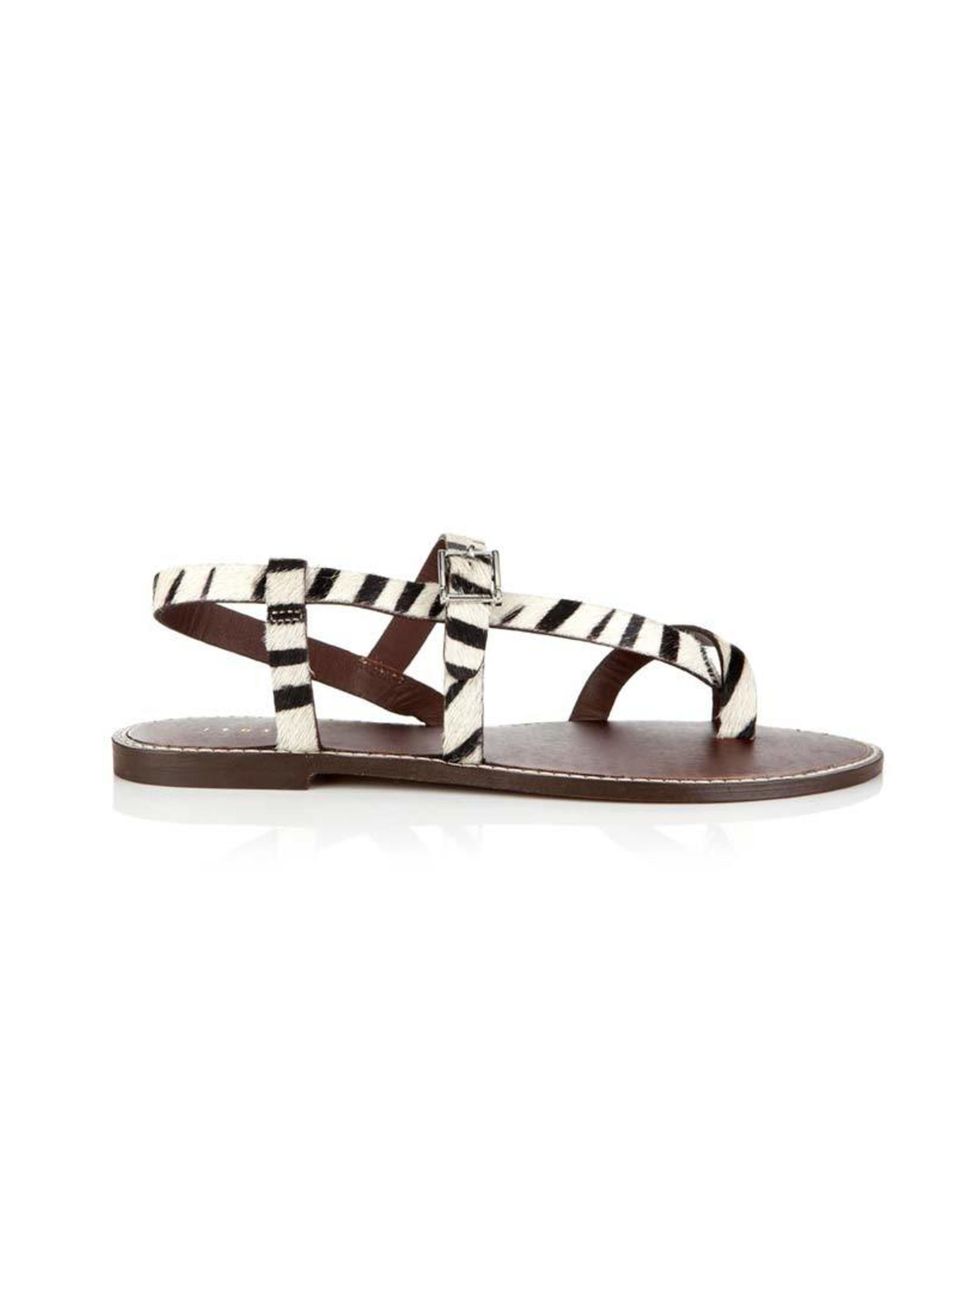 <p>Clash graphic animal print against pretty florals.</p>

<p><a href="http://www.jigsaw-online.com/products/marina-sandal-10278" target="_blank">Jigsaw</a> sandals, £49</p>